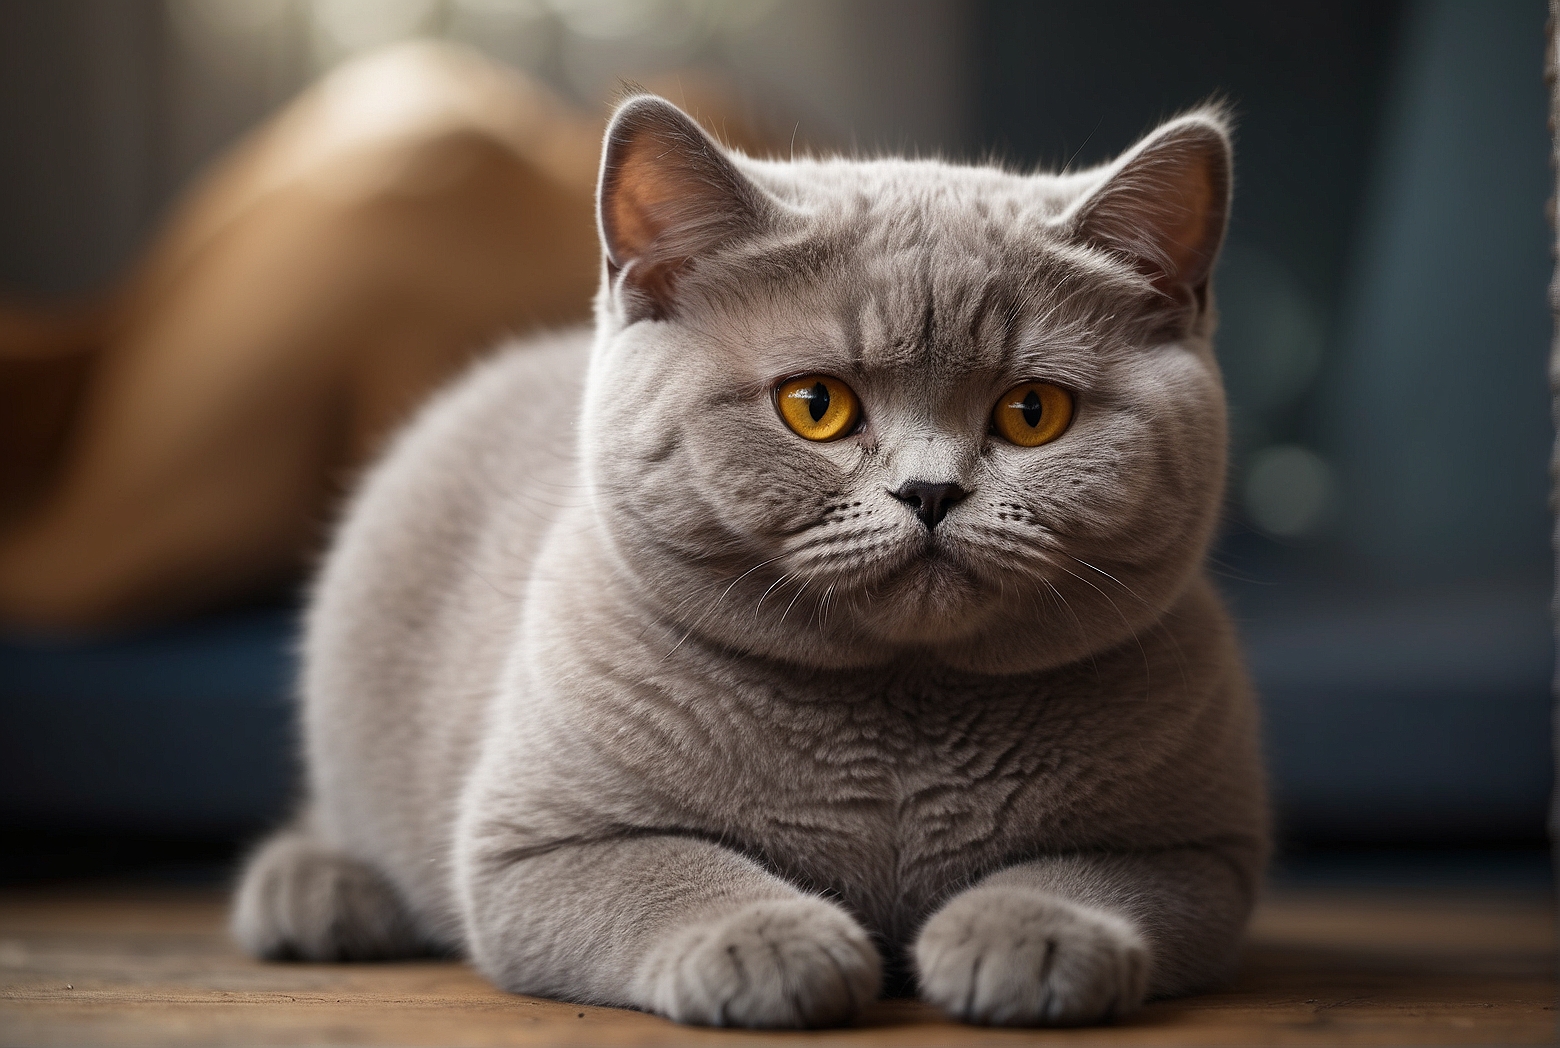 What Type Of Fur Does An British Shorthair Have?